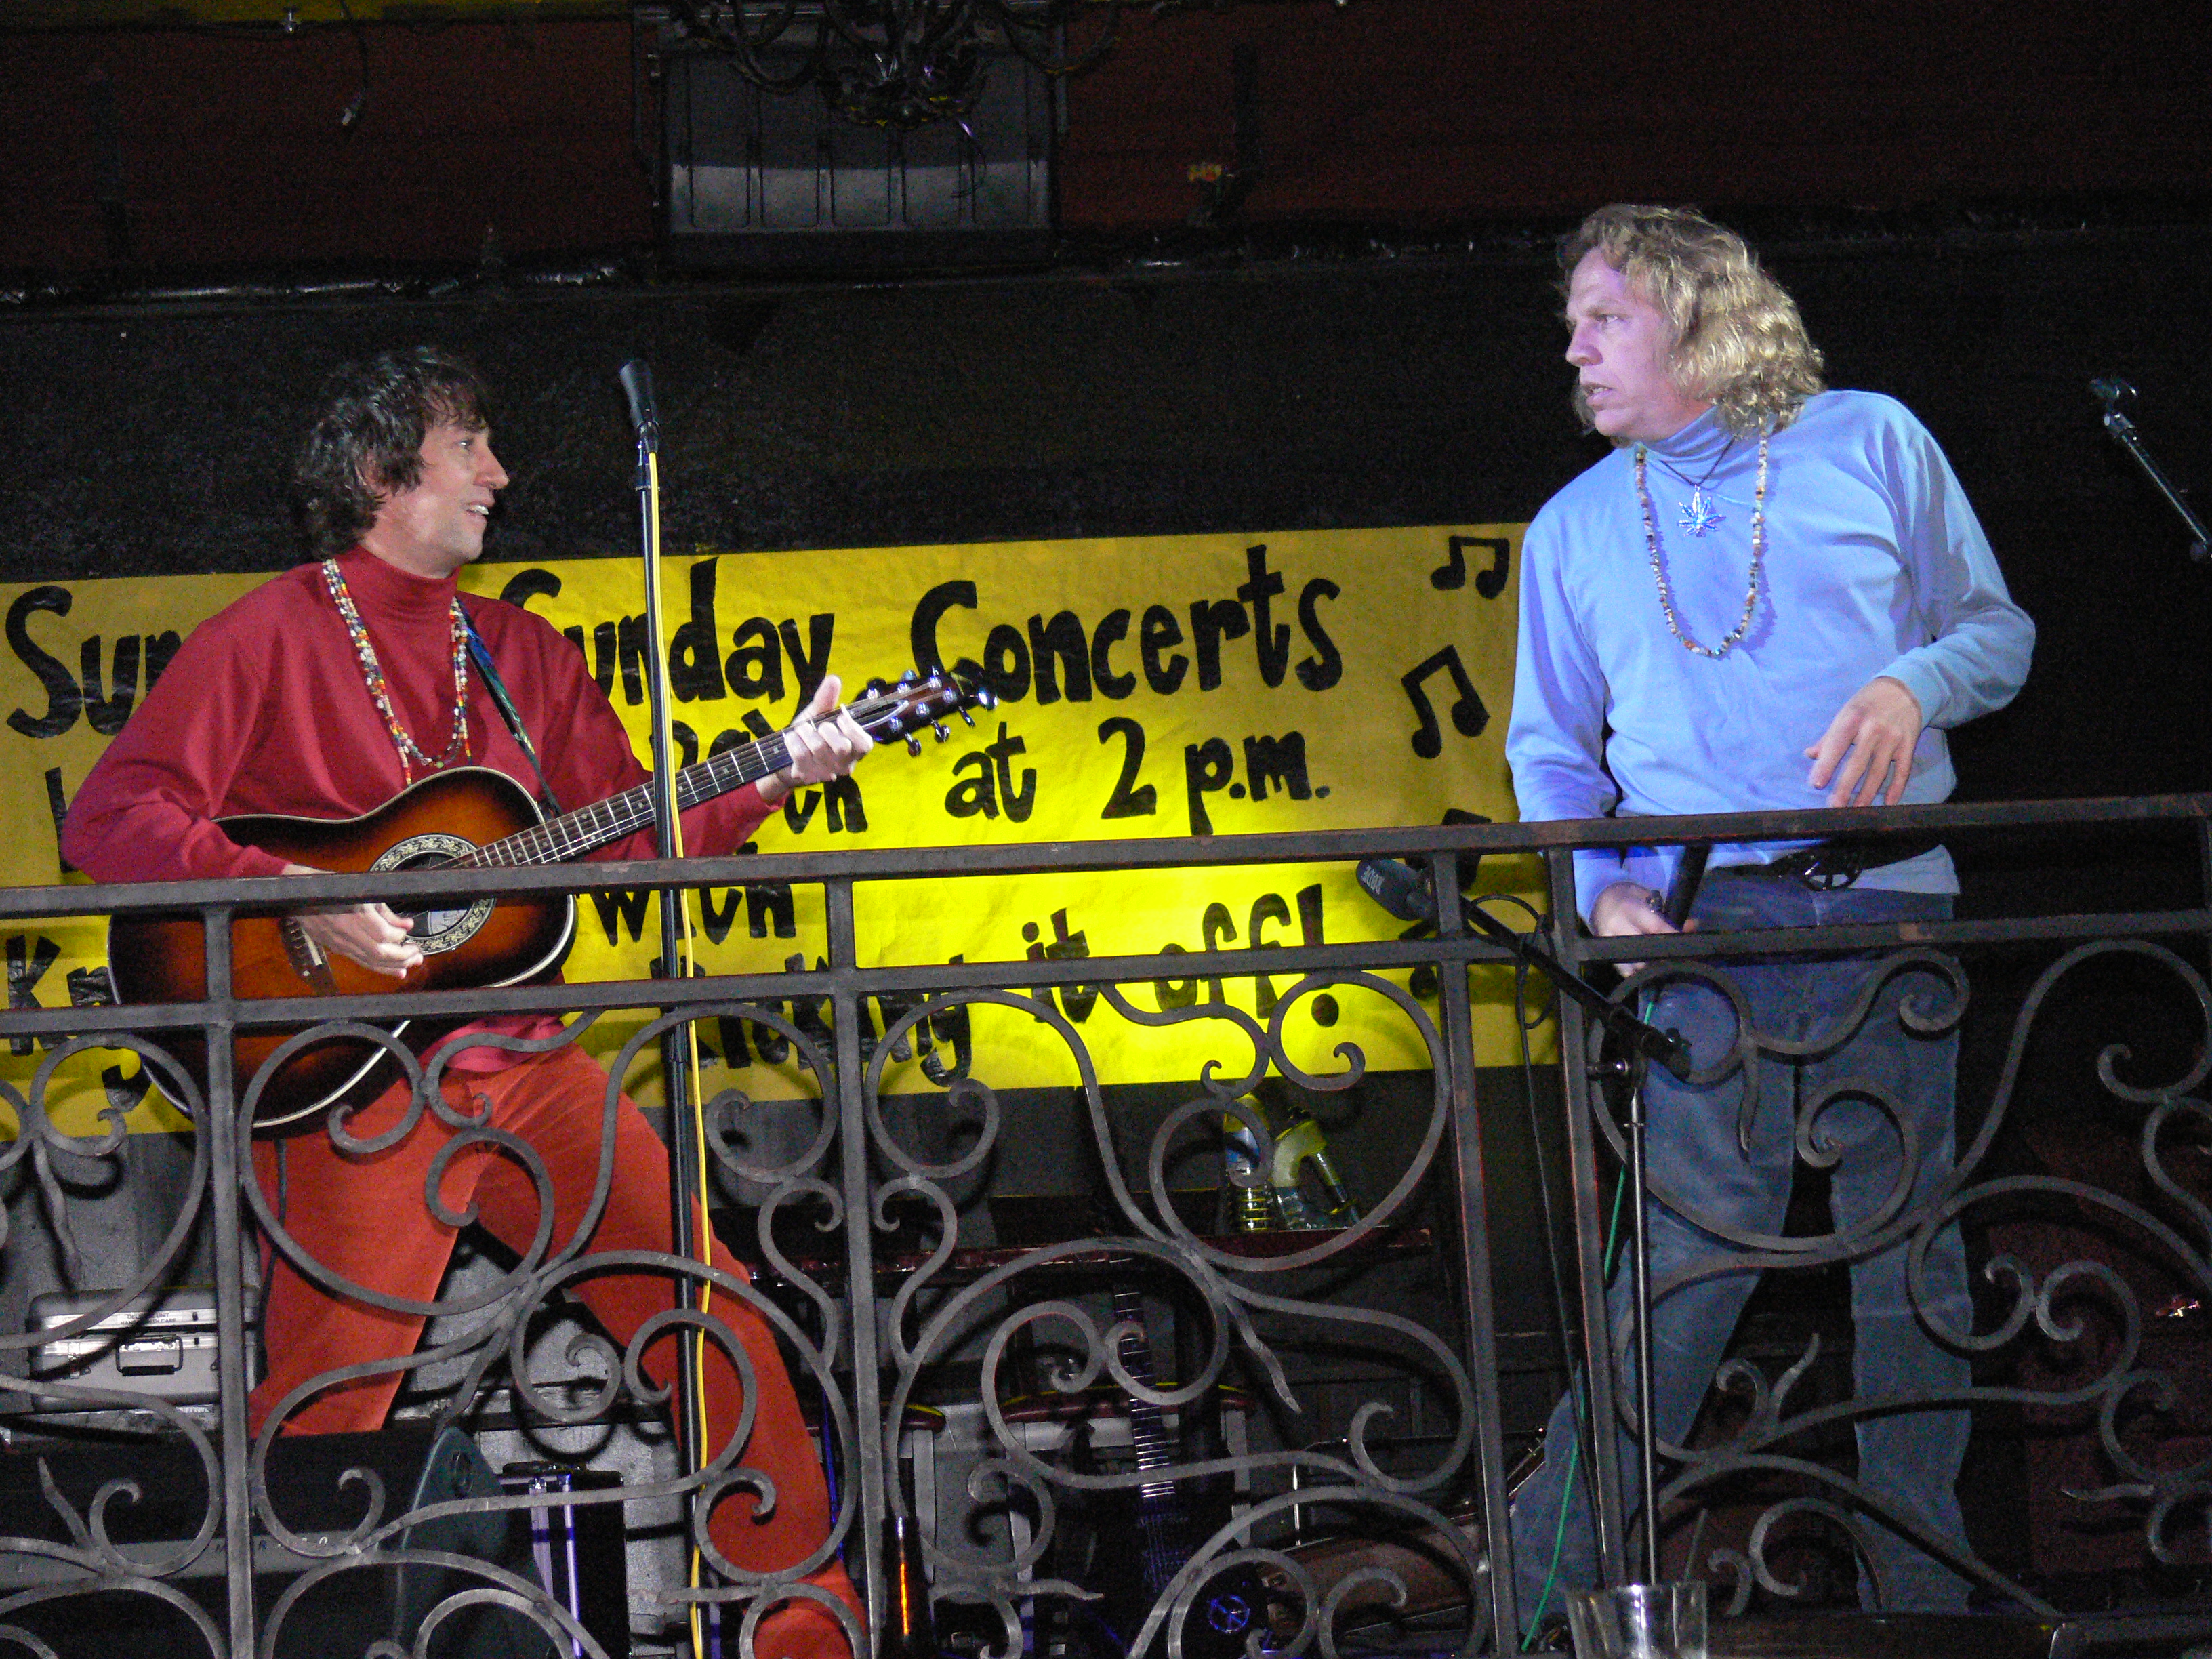 Piper and Tupper in 2010 live performance.